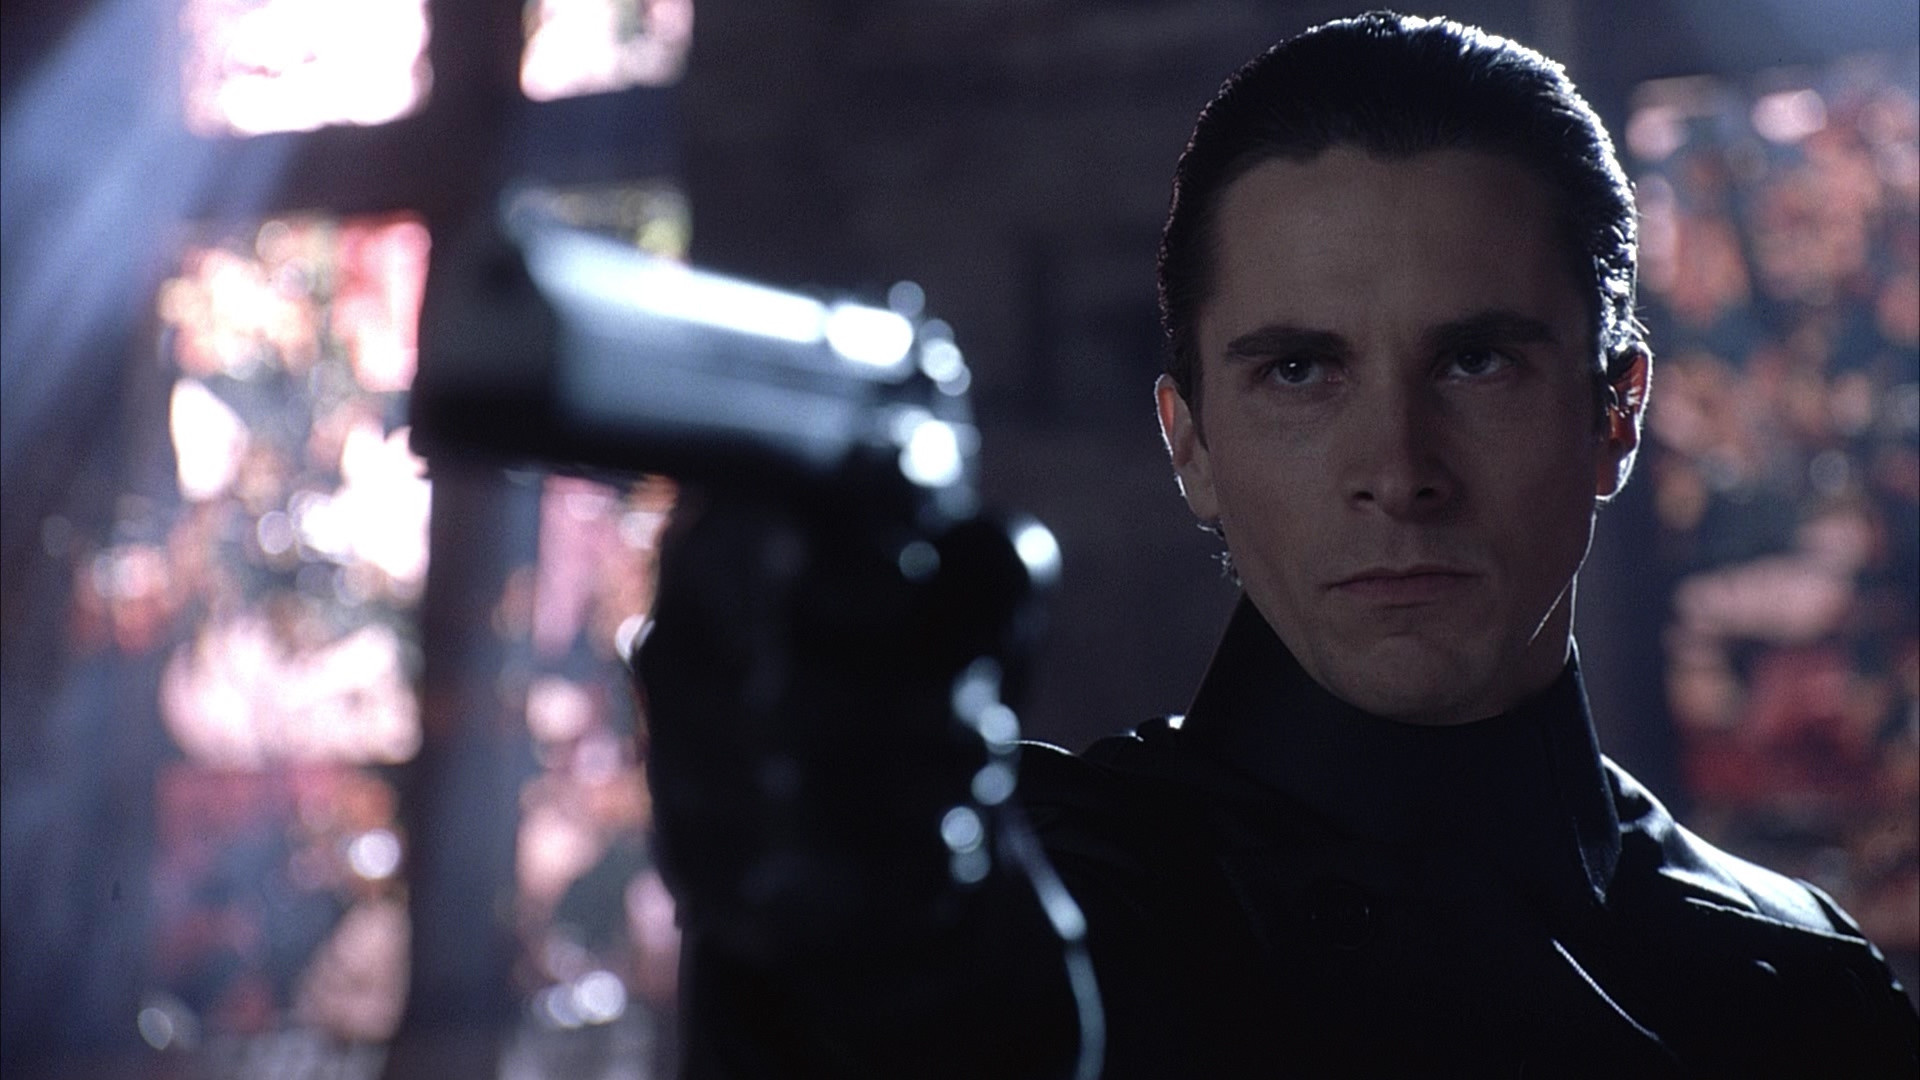 Equilibrium movie, Dystopian society, Christian Bale, Action-packed thriller, 1920x1080 Full HD Desktop